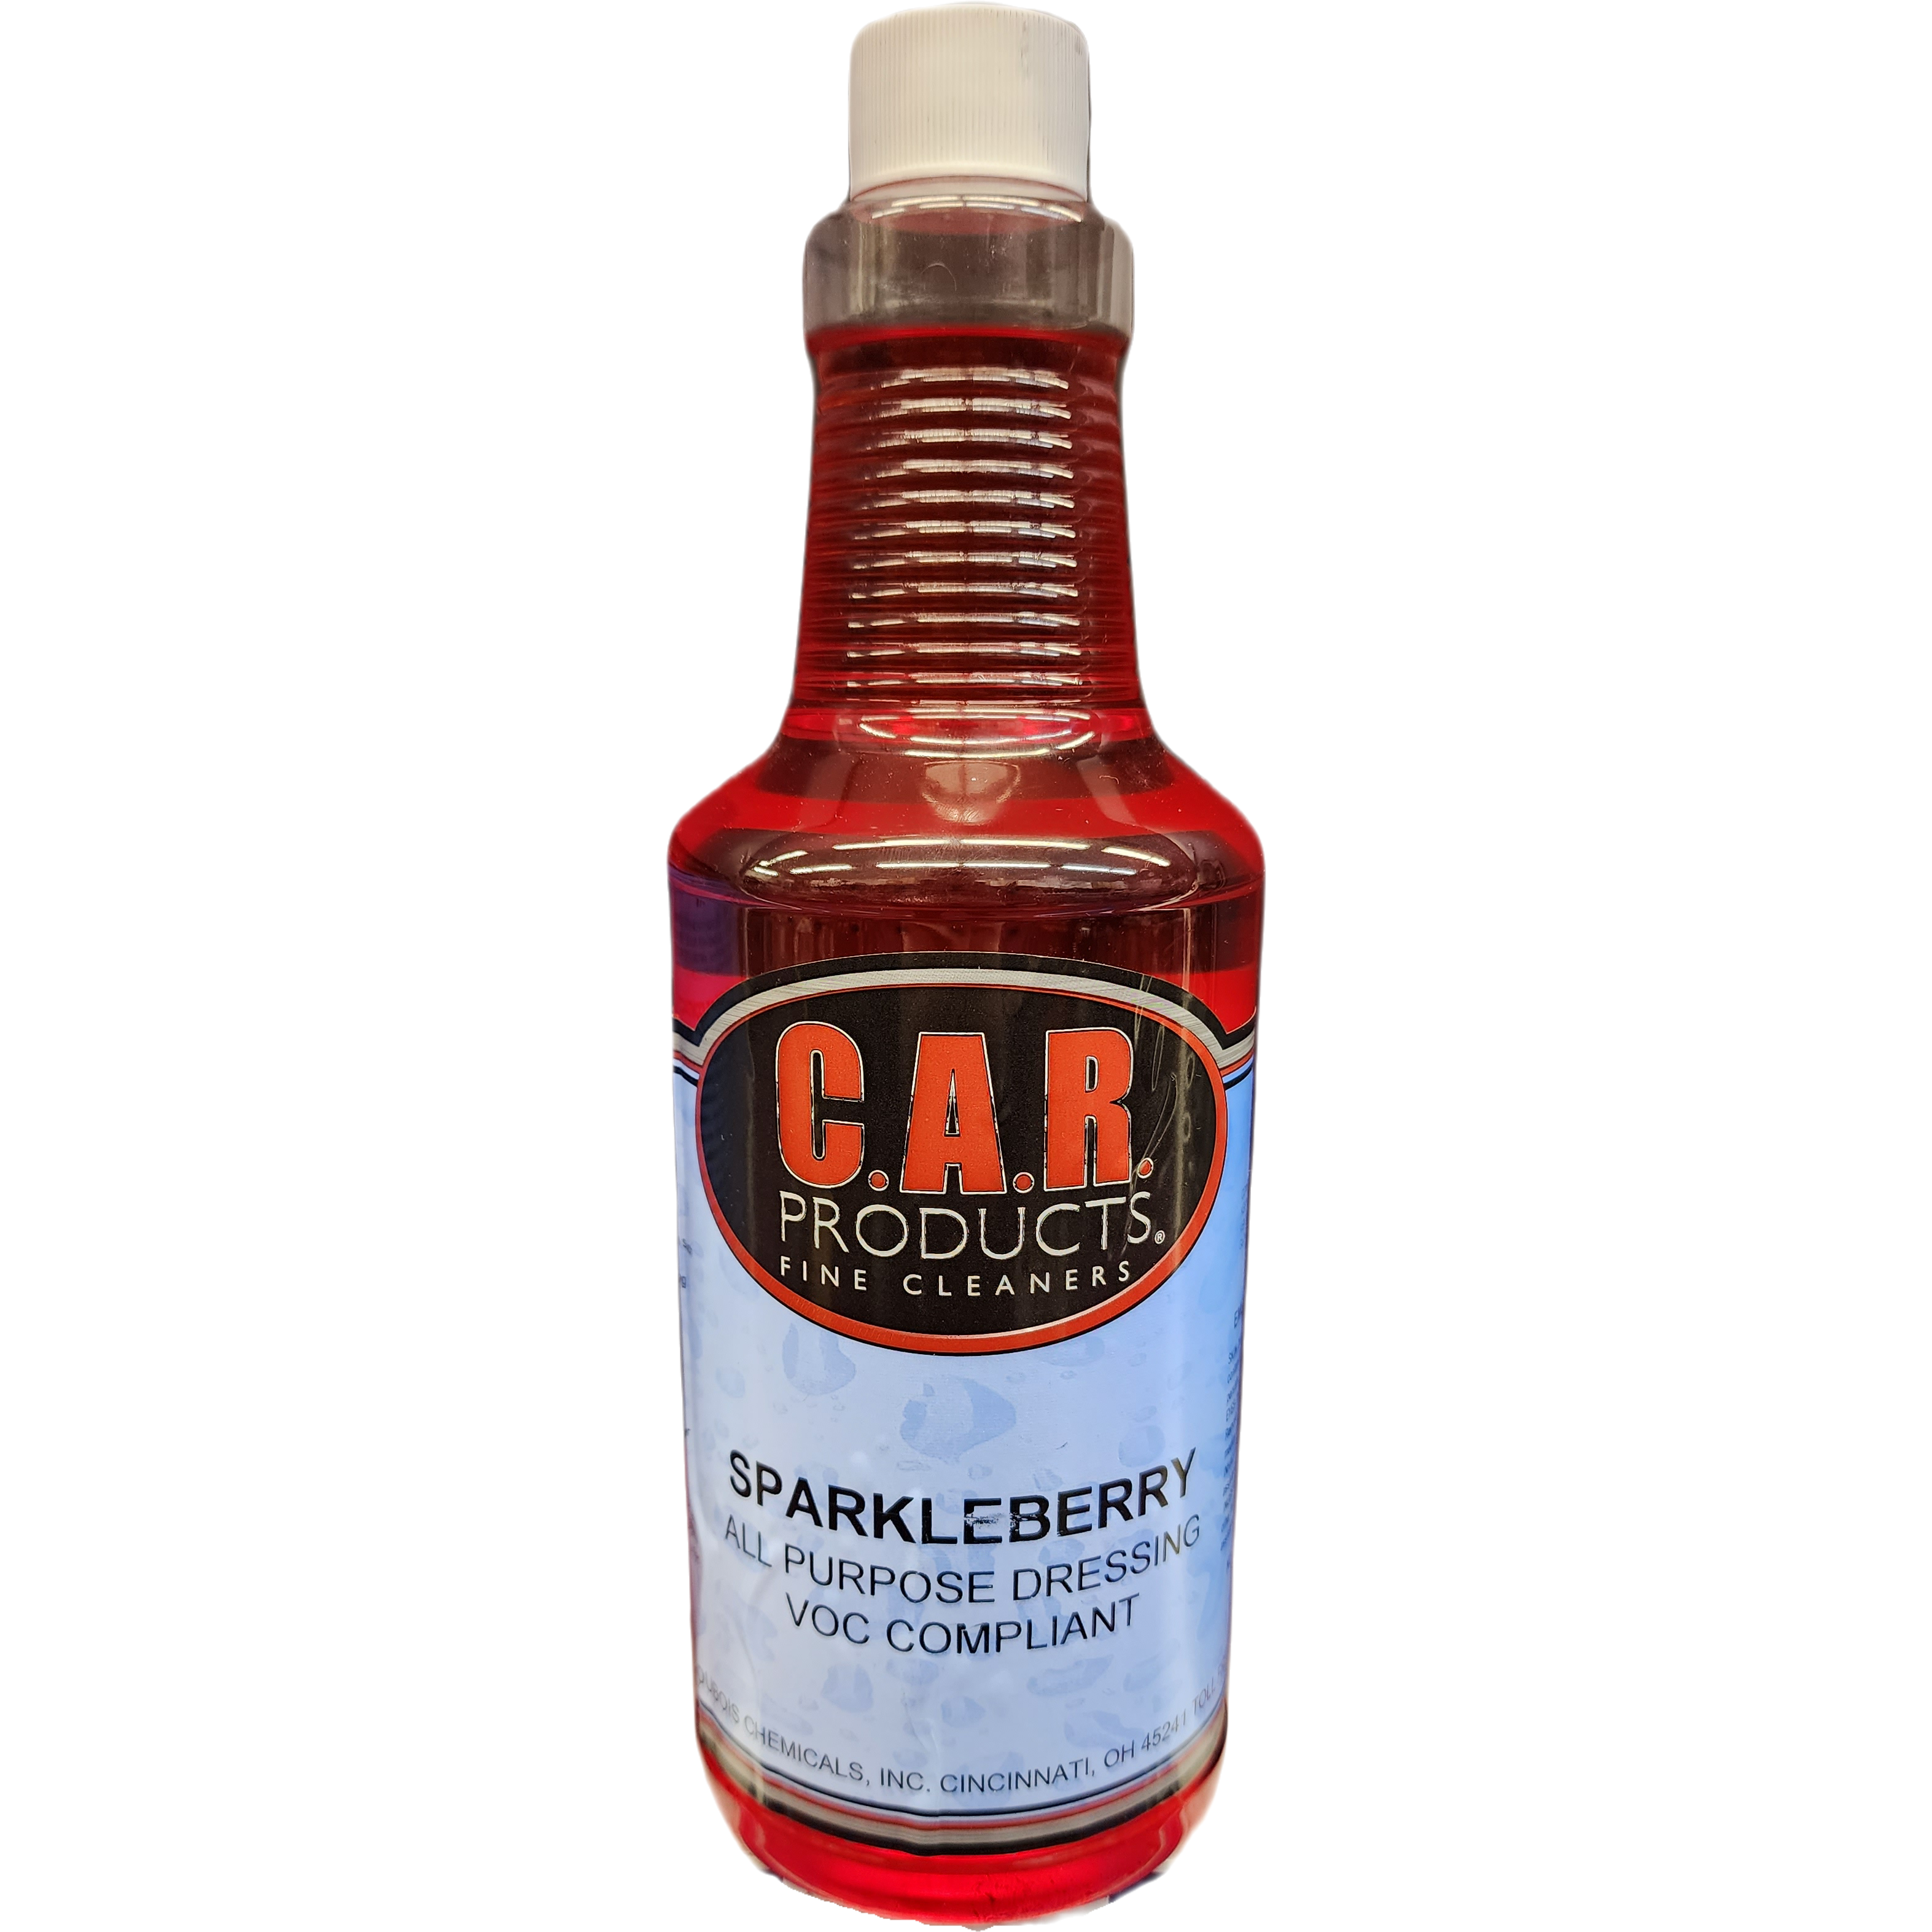 XCP CAR-20332 CAR Products Sparkleberry All Purpose Dressing (1 qt)